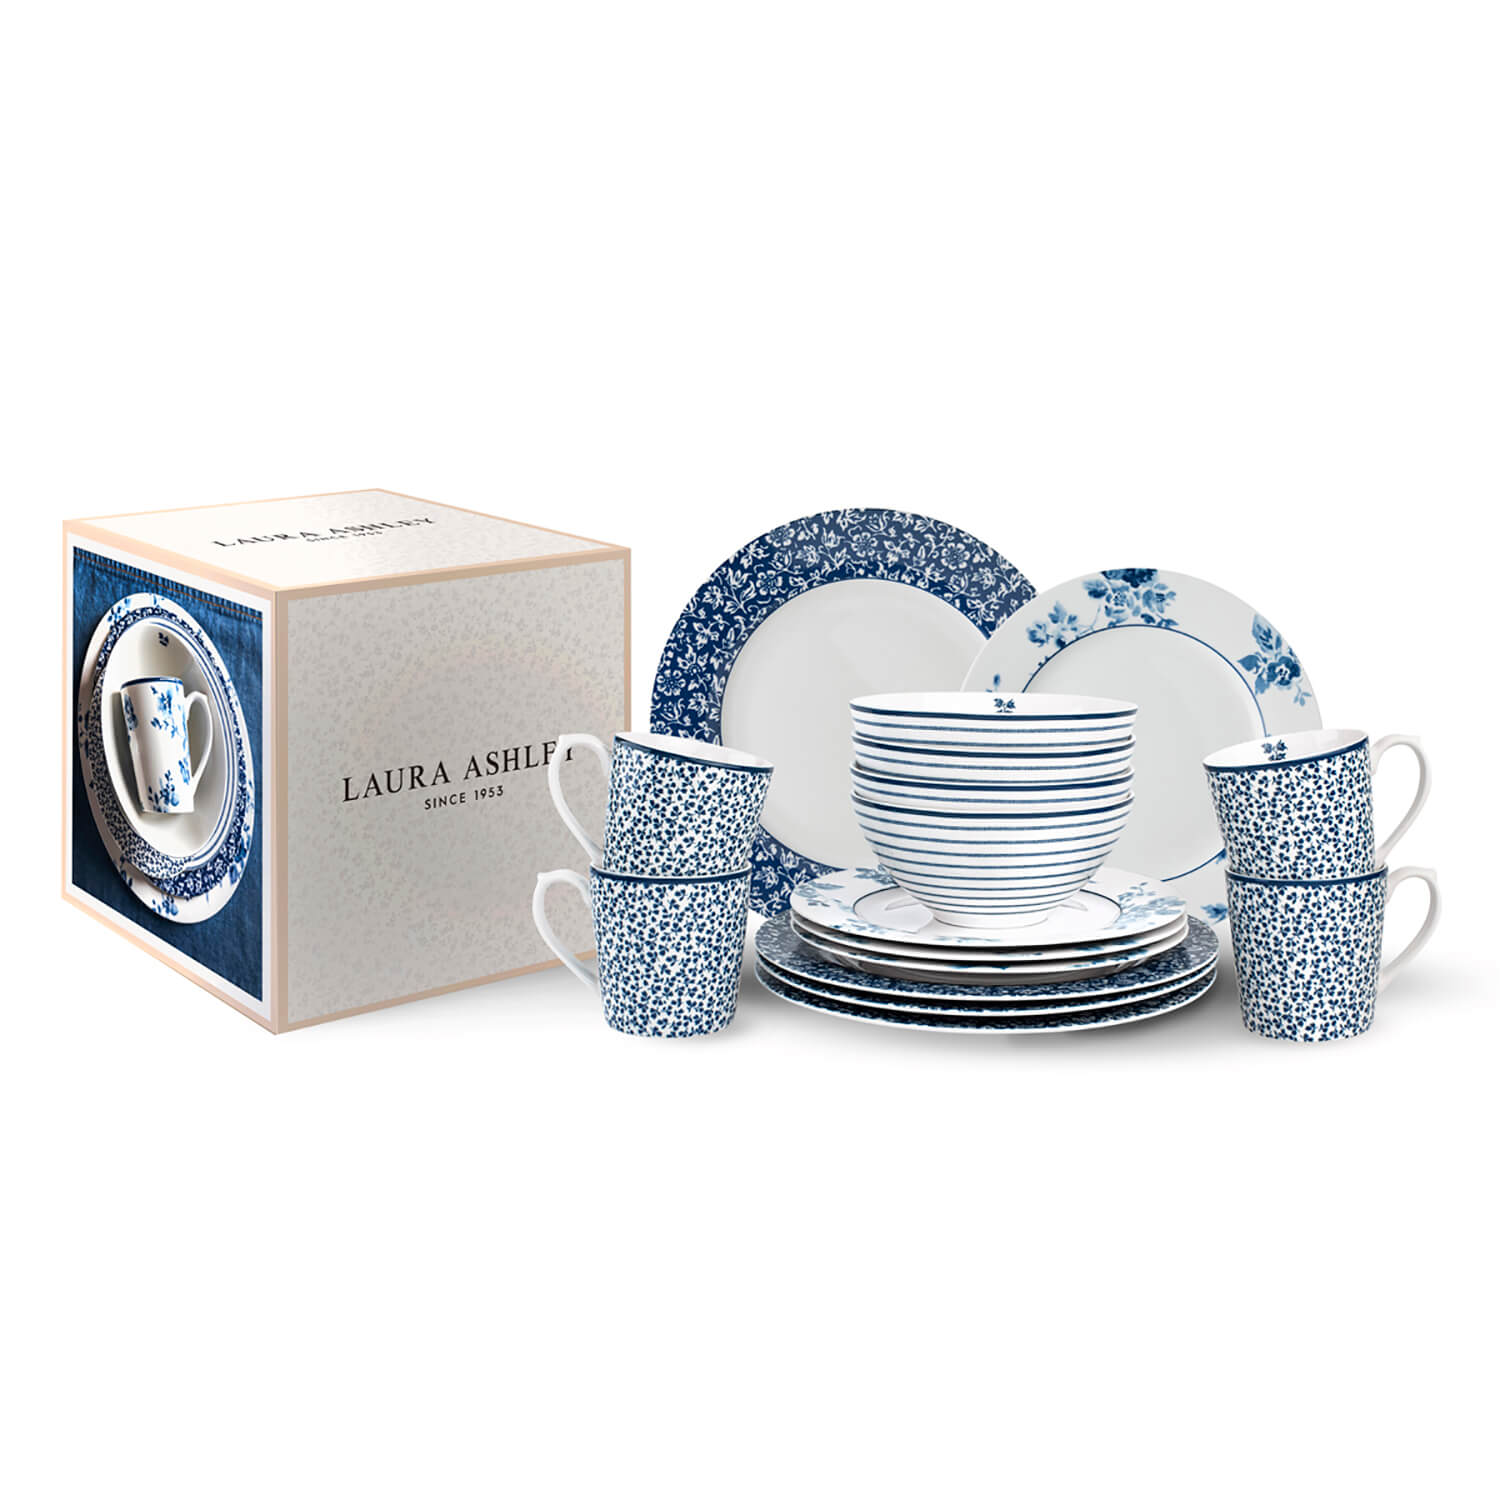 Laura Ashley Blueprint Collectables 16-Piece Tableware Giftset 1 Shaws Department Stores